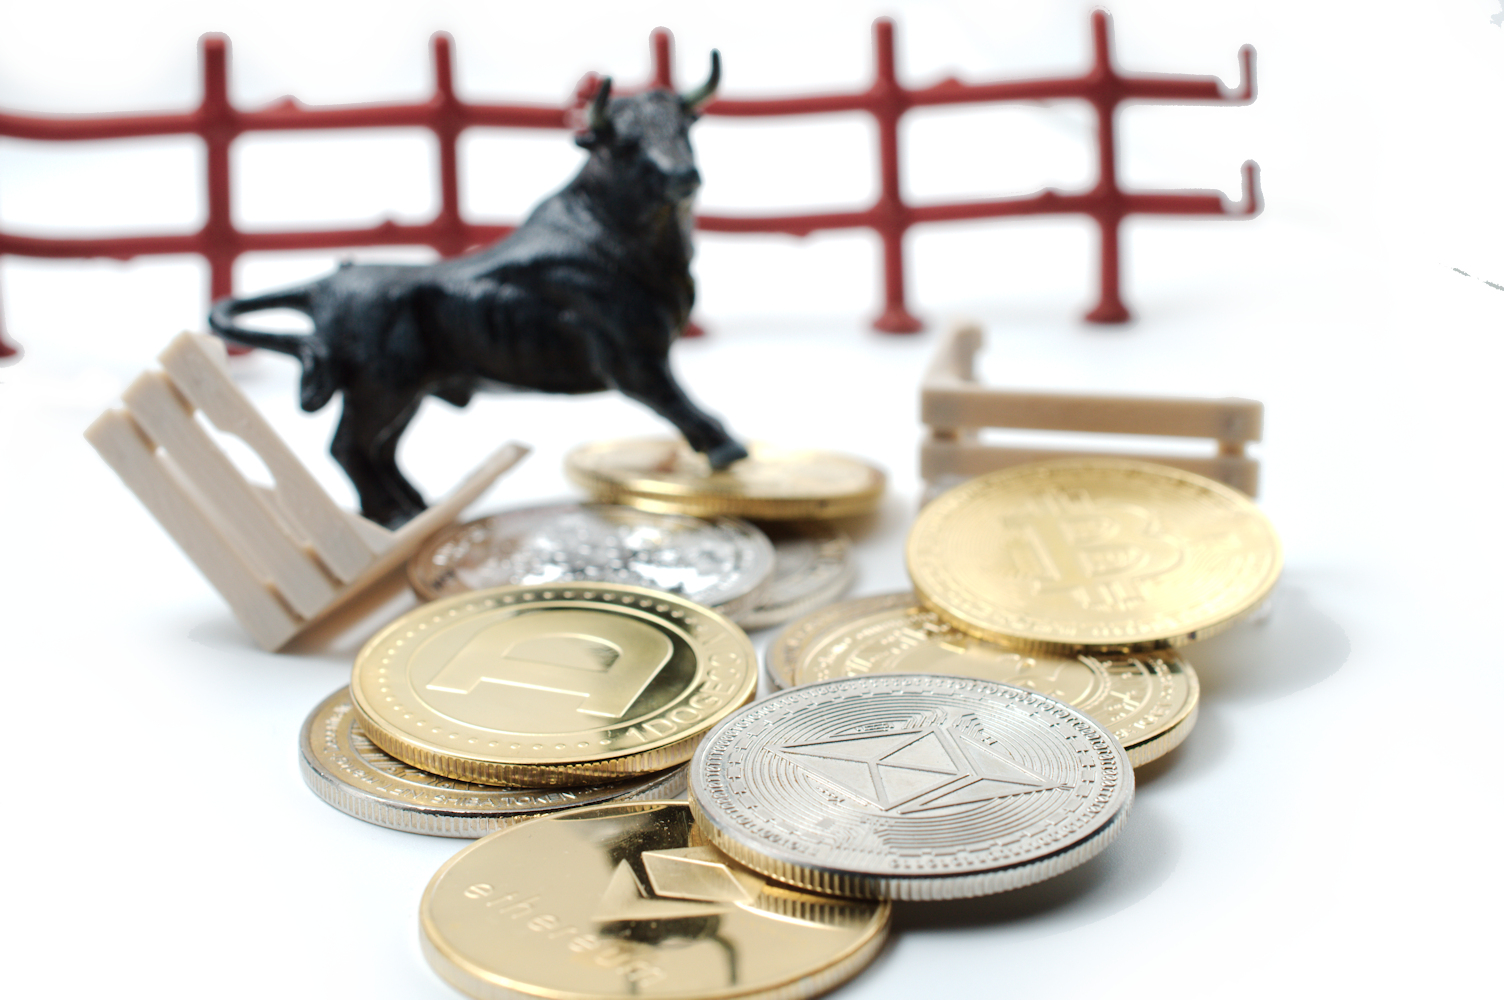 Cryptocurrencies With A Bull Standing in Background Ⓒ 2023 – Crypto Coin Opps